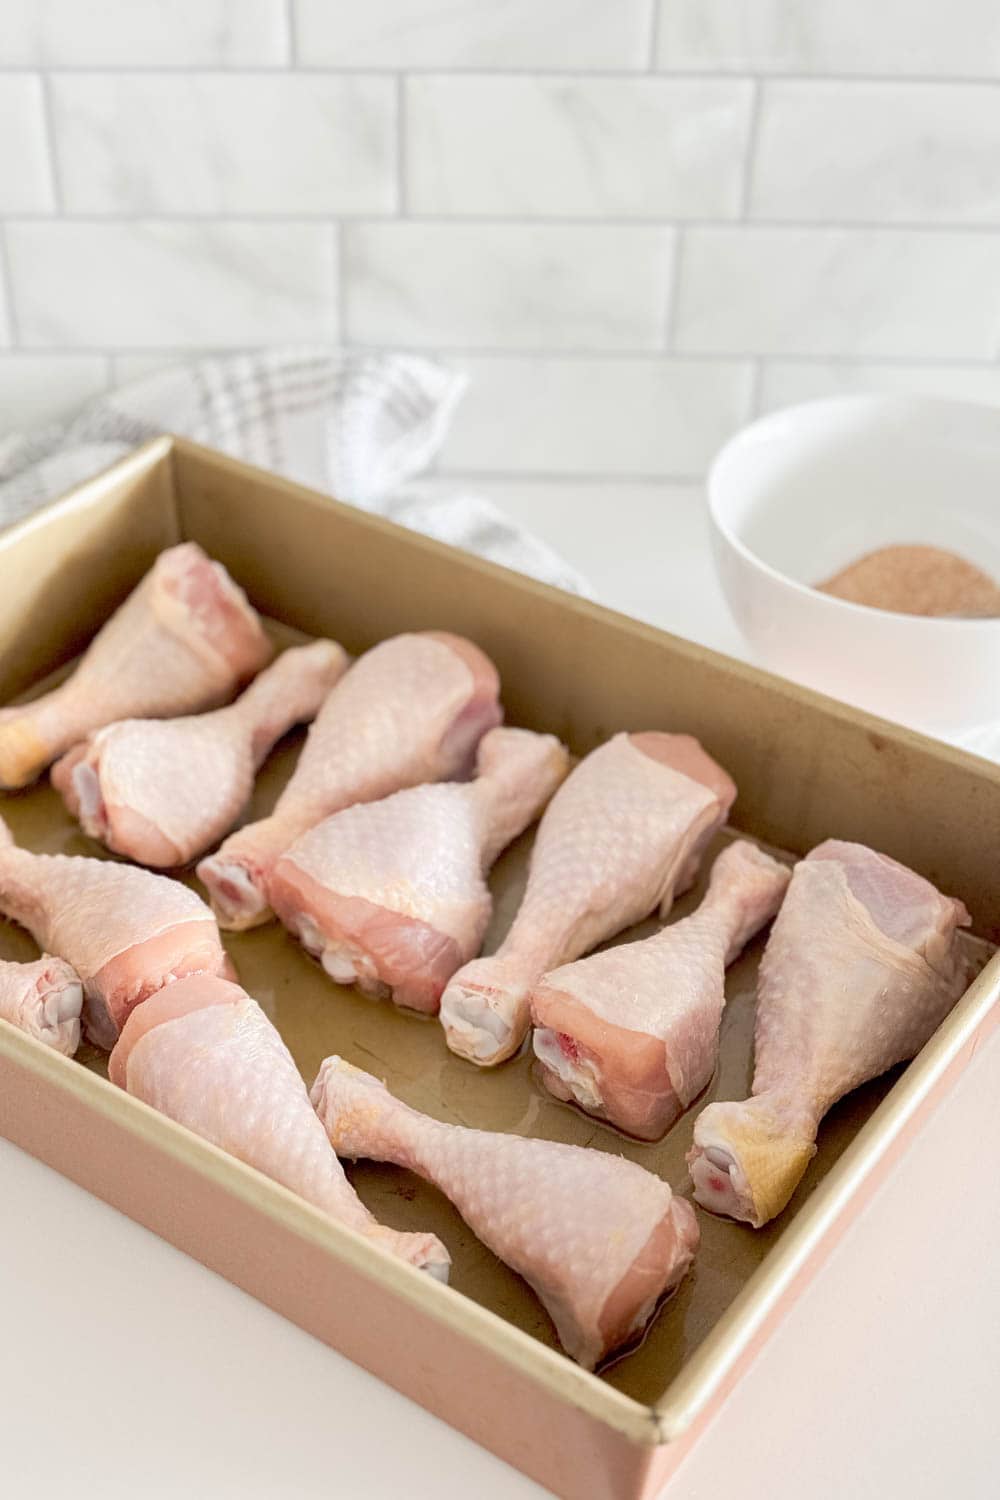 Lining up raw chicken drumsticks in a pan